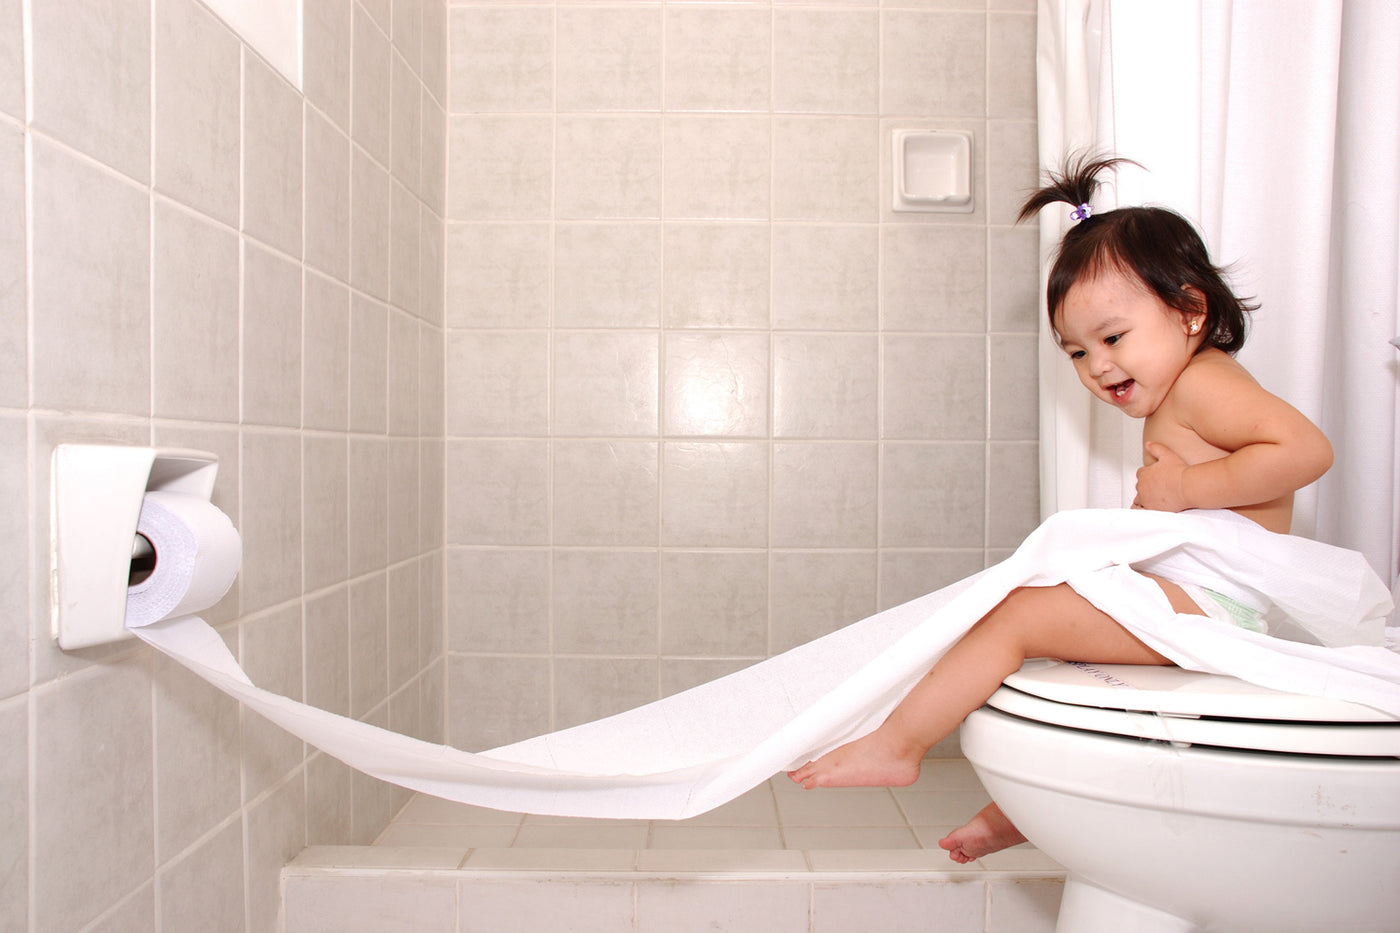 Potty Training: You've got this!